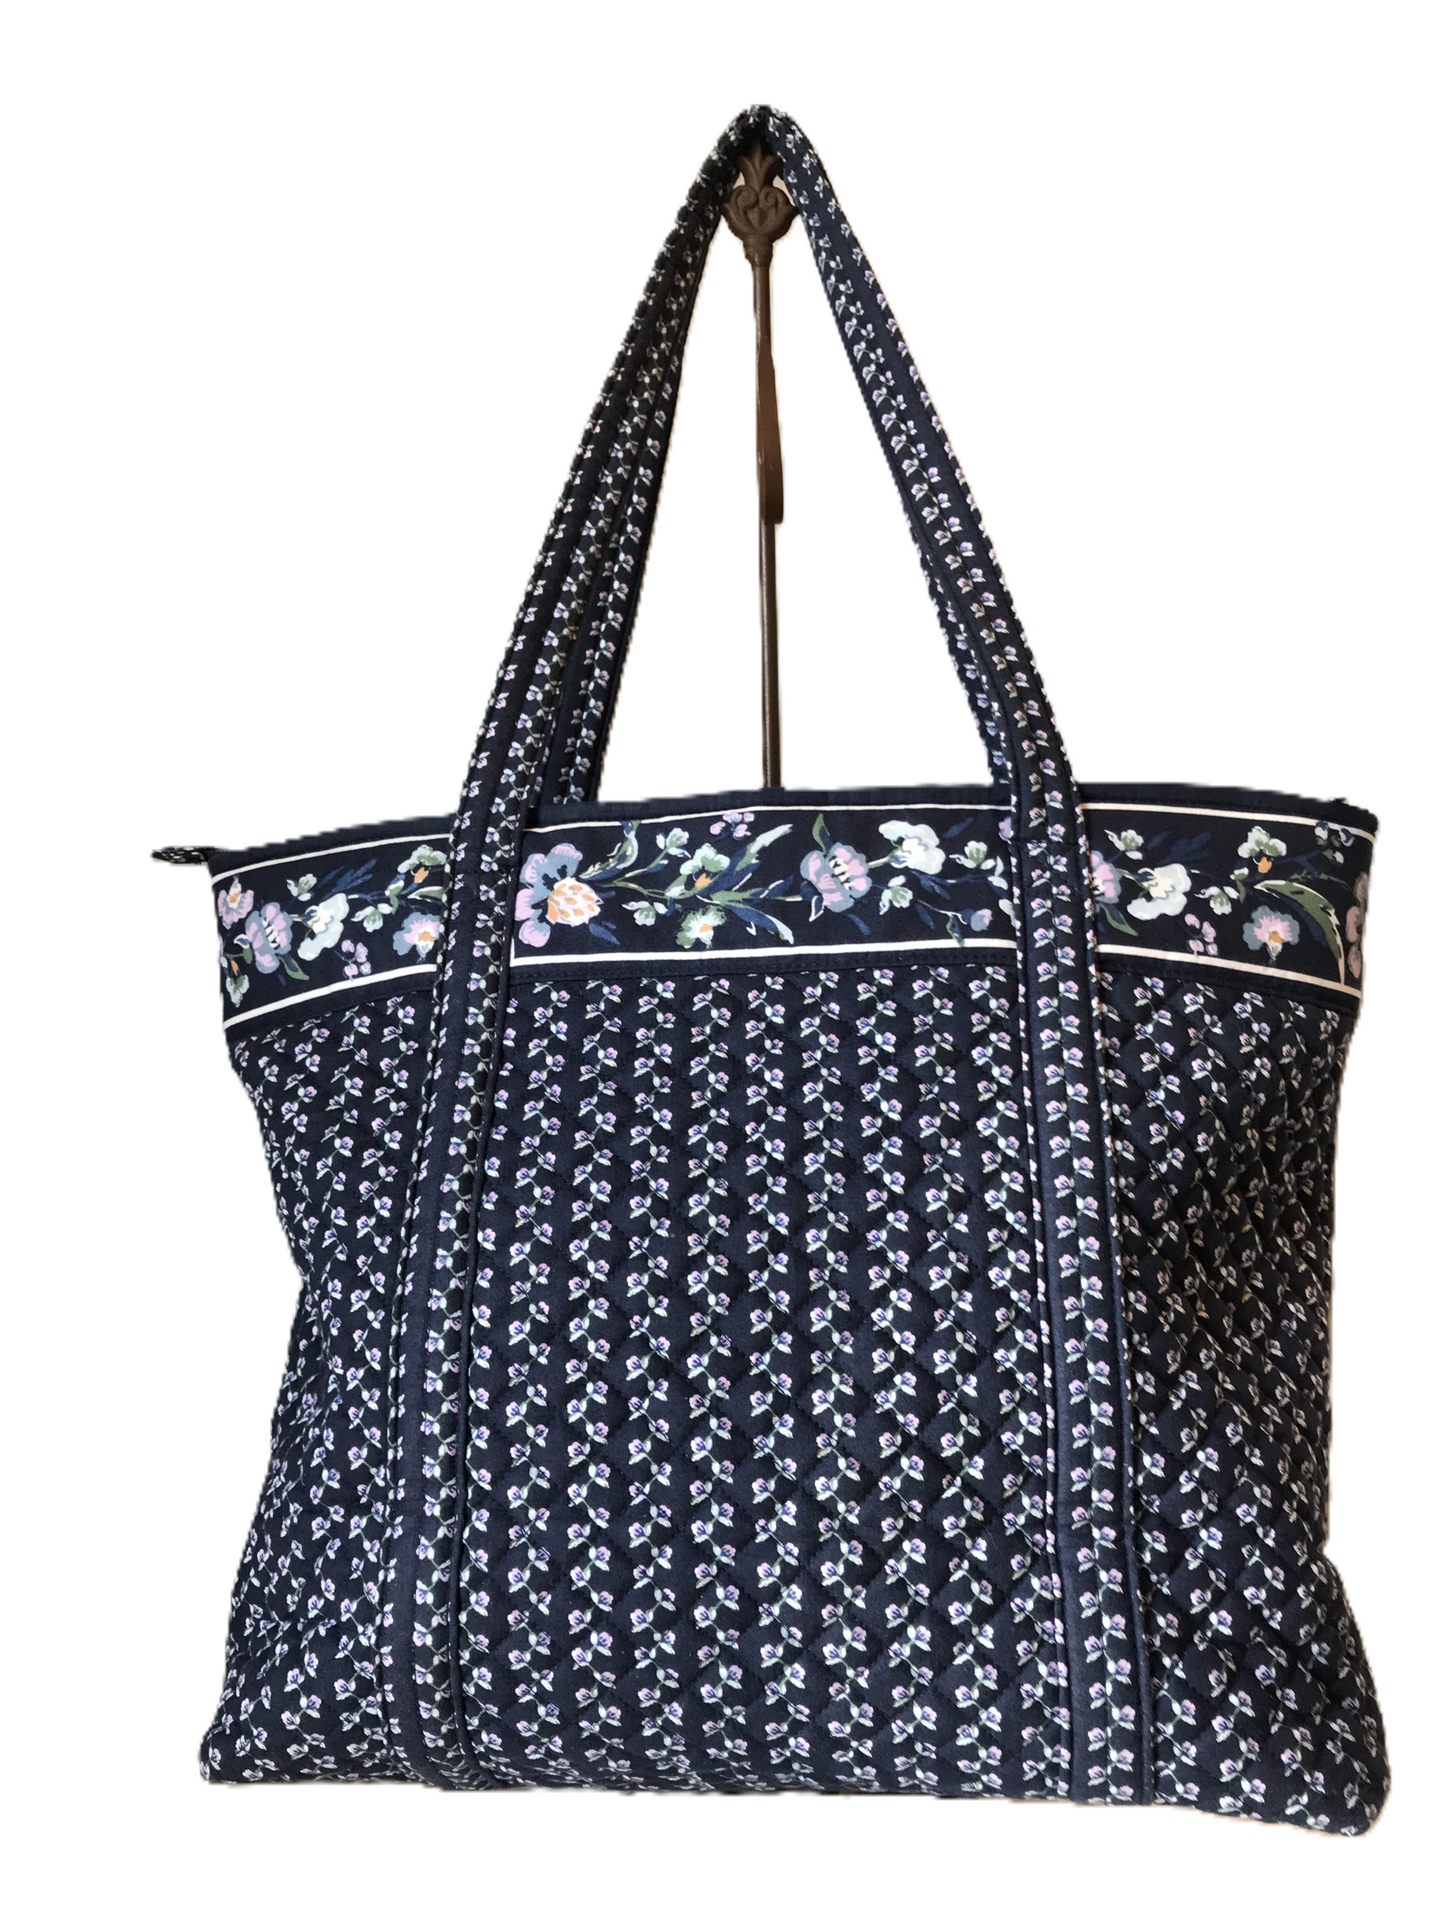 Tote By Vera Bradley, Size: Large